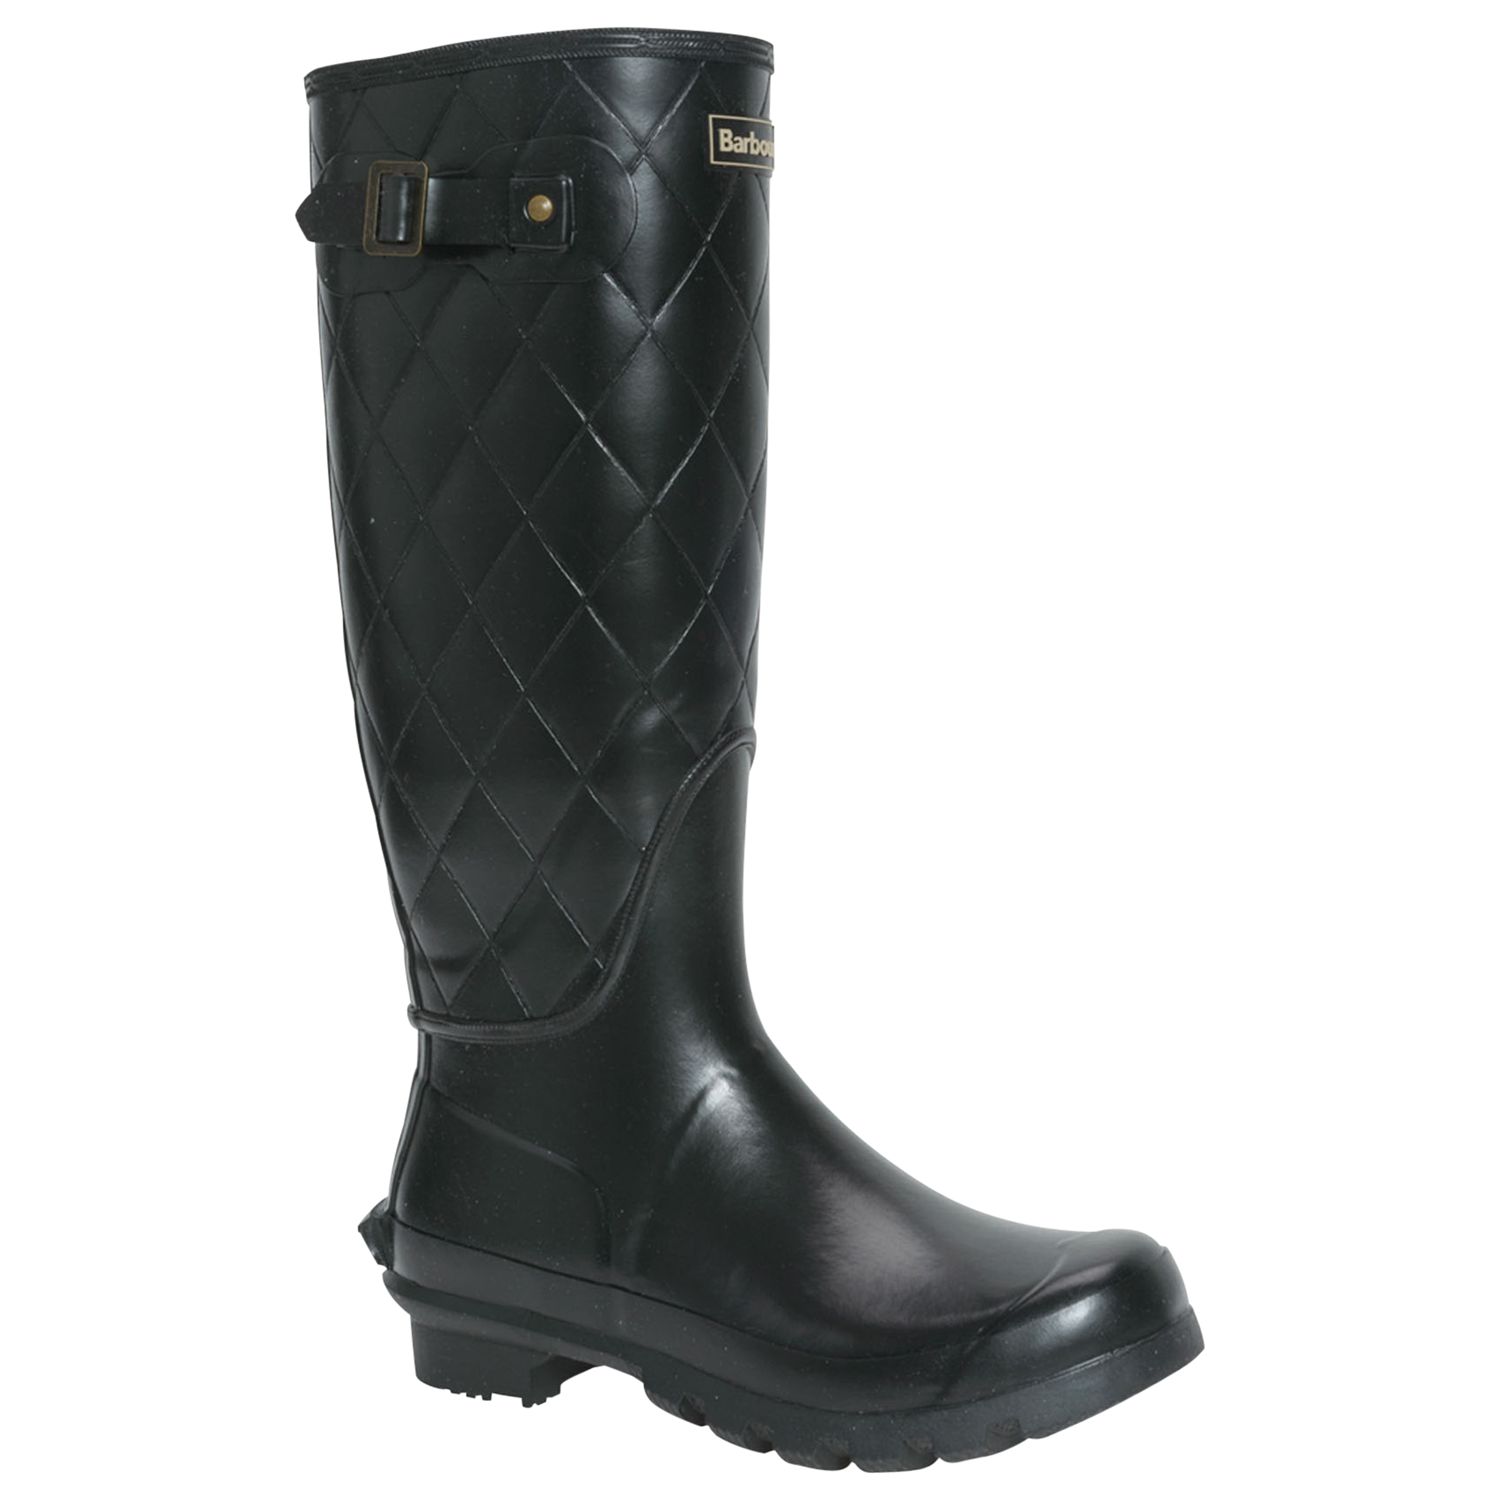 barbour quilted wellies ladies Cheaper 